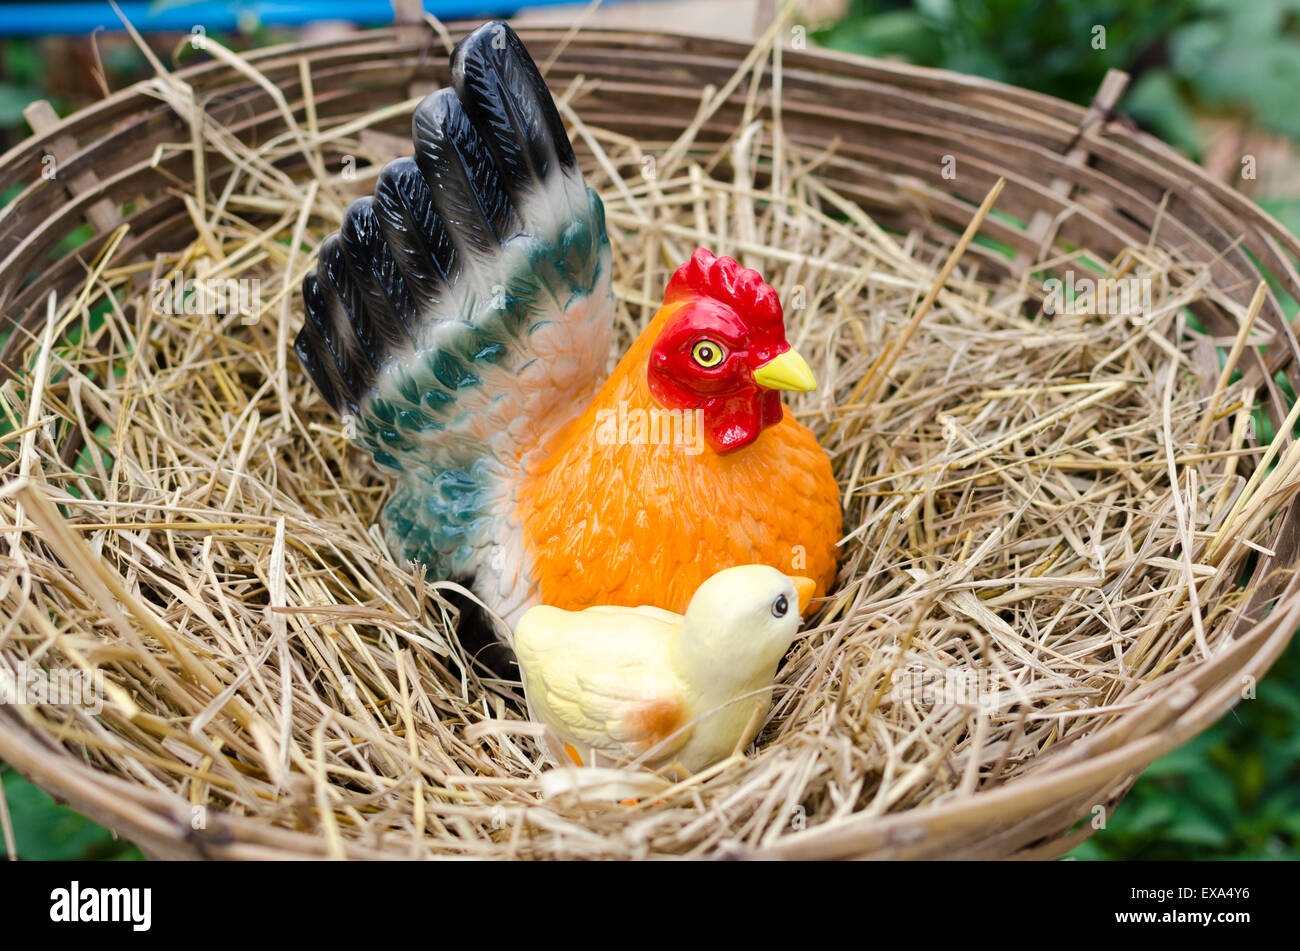 Statue of chickens on a pile of straw. Stock Photo